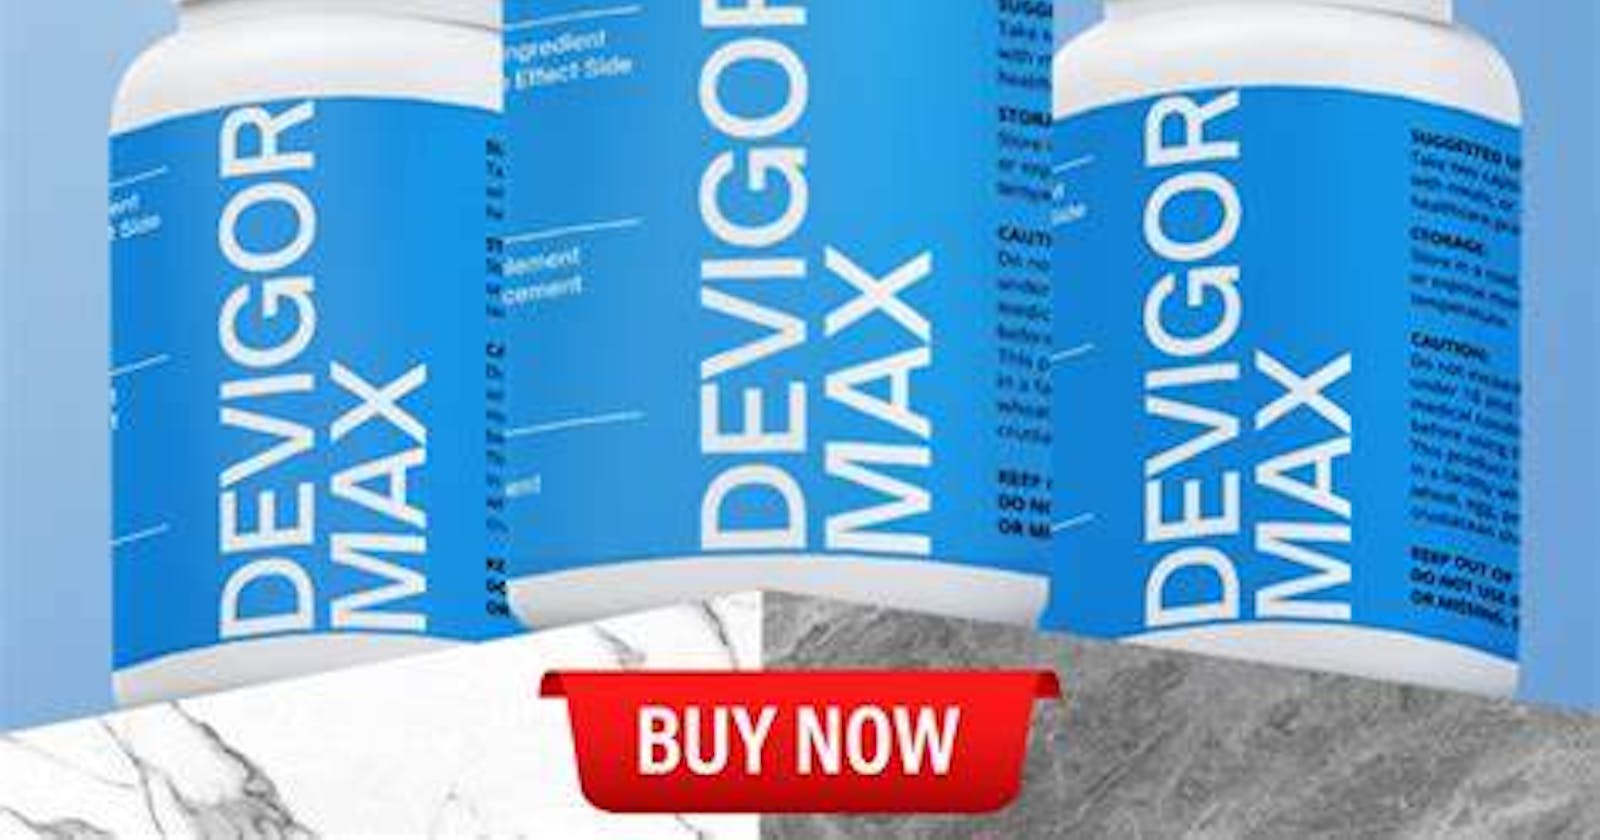 DevigorMax REVIEWS DOES IT REALLY WORK? THE TRUTH